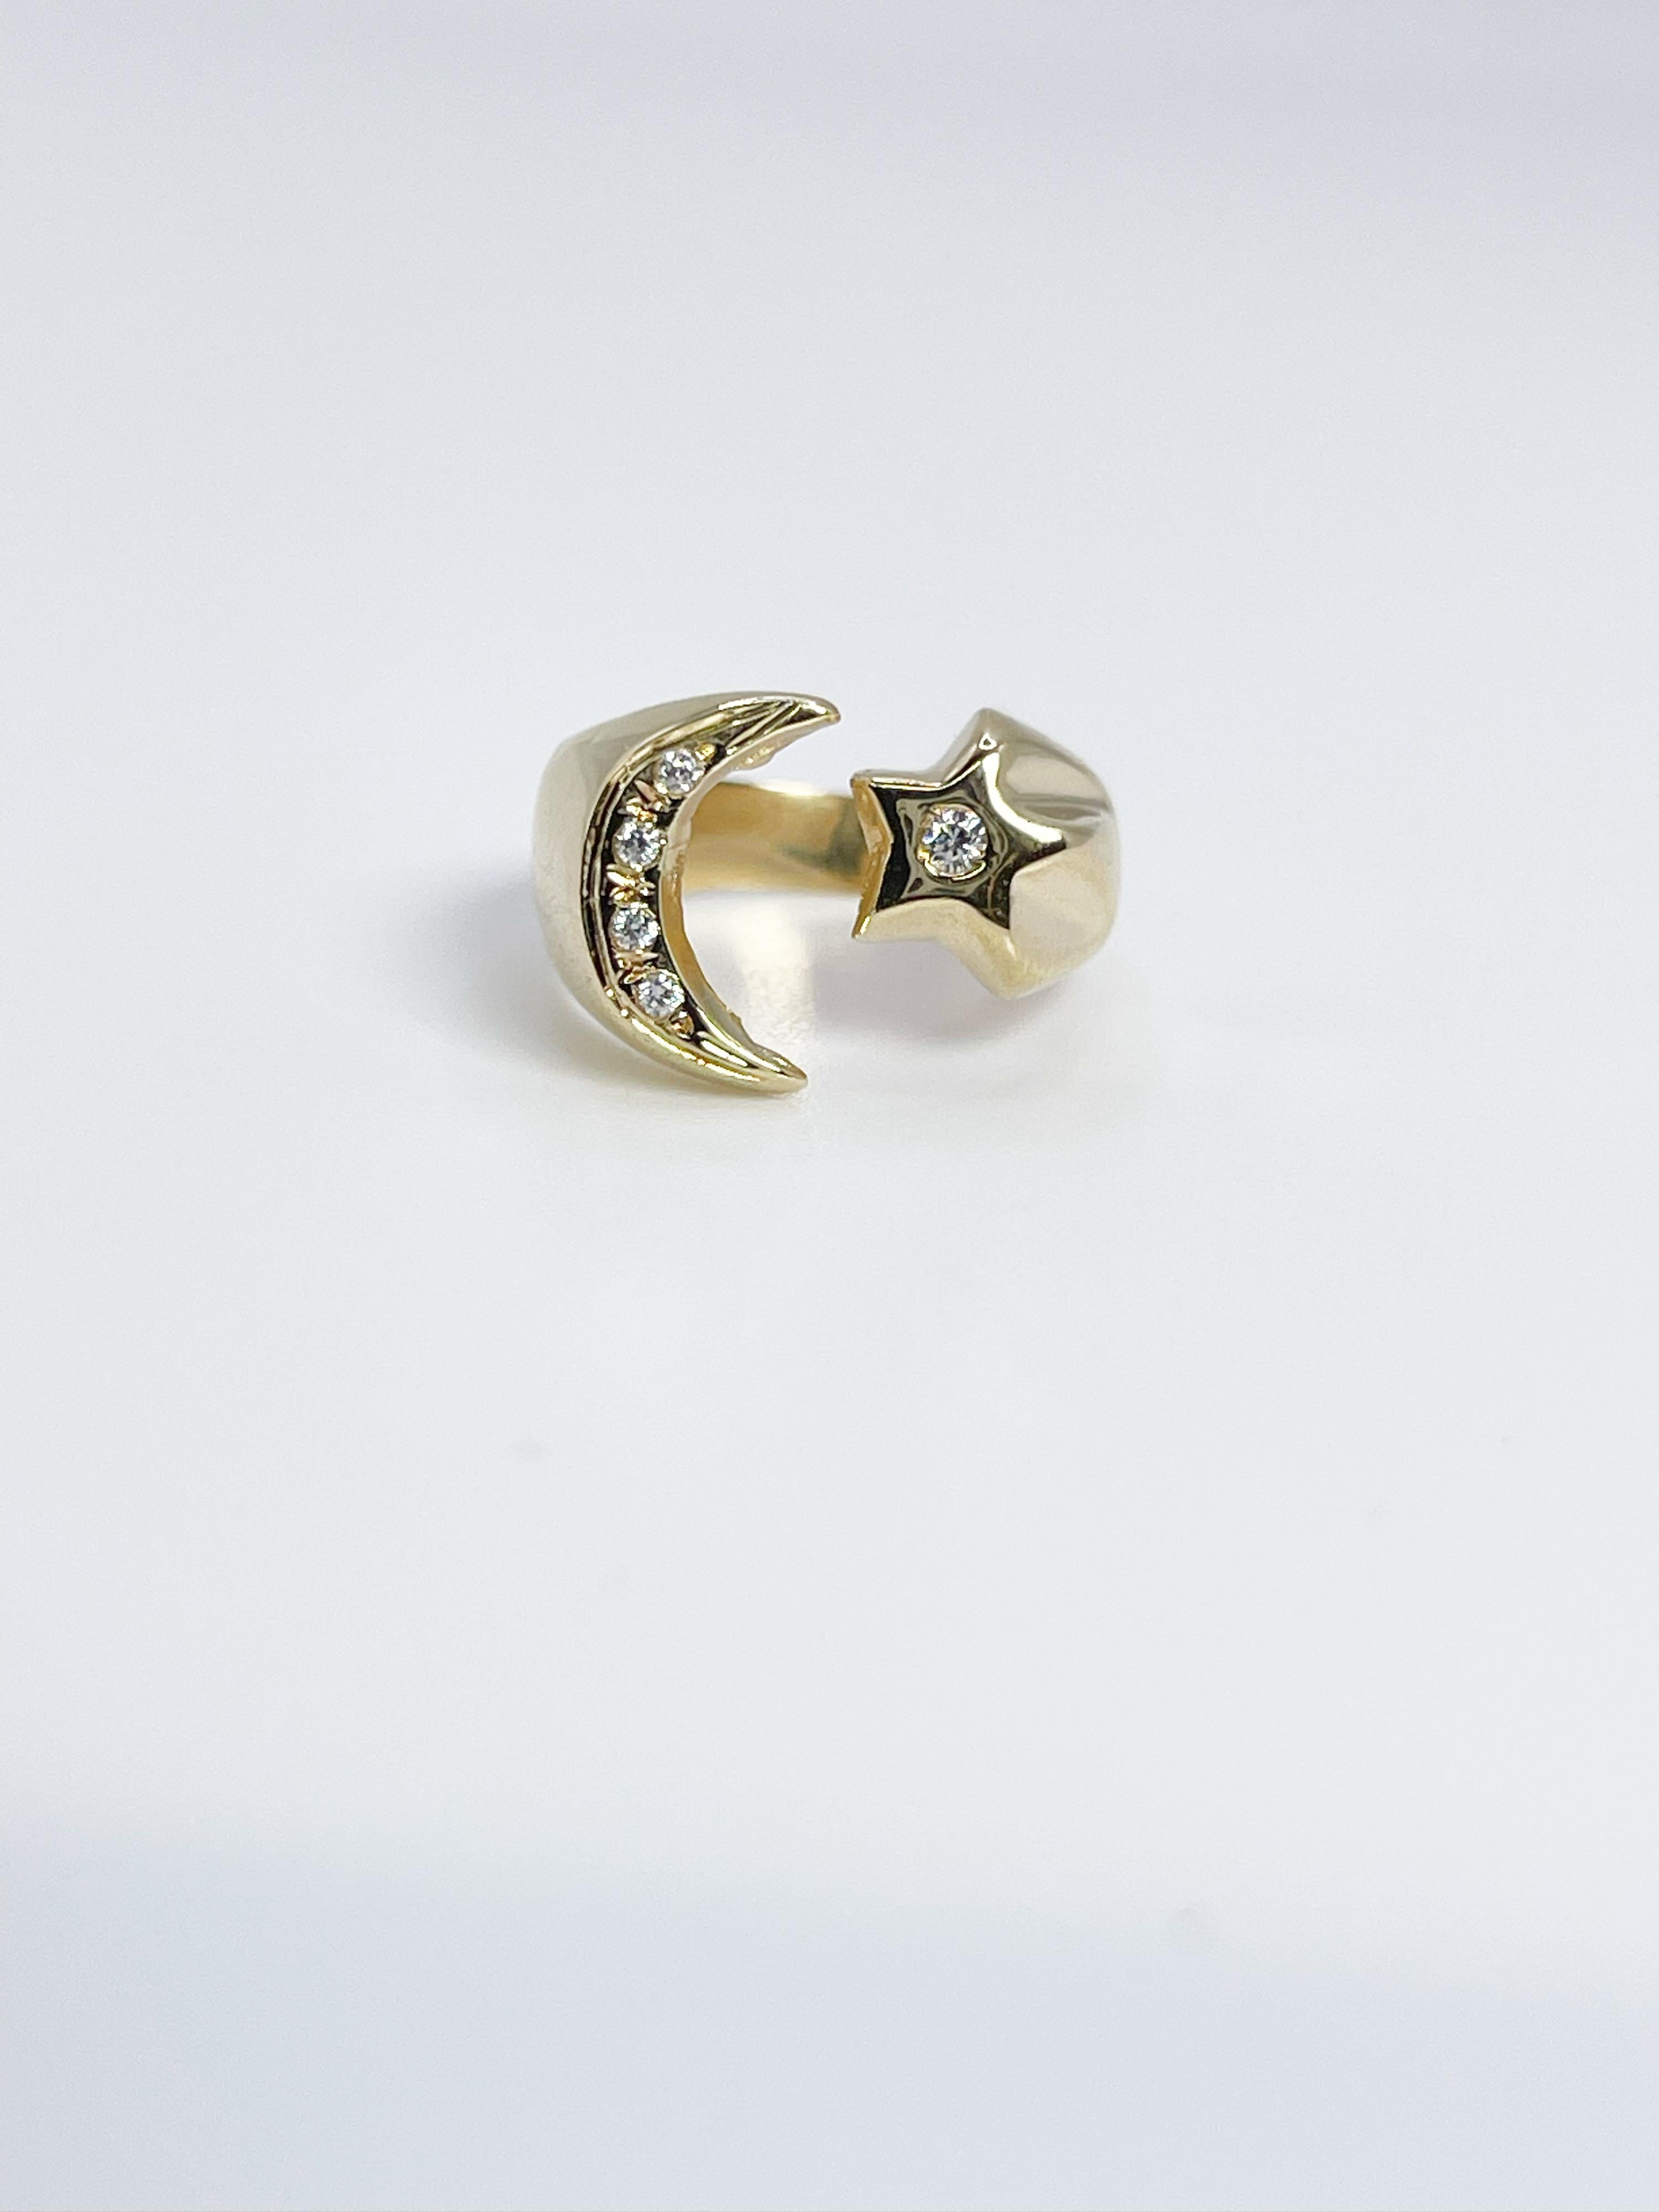 Simple moon and star ring in 18KT yellow gold made with CZ stones.

GRAM WEIGHT: 3.63gr
GOLD: 18KT yellow gold
SIZE: 5

WHAT YOU GET AT STAMPAR JEWELERS:
Stampar Jewelers, located in the heart of Jupiter, Florida, is a custom jewelry store and